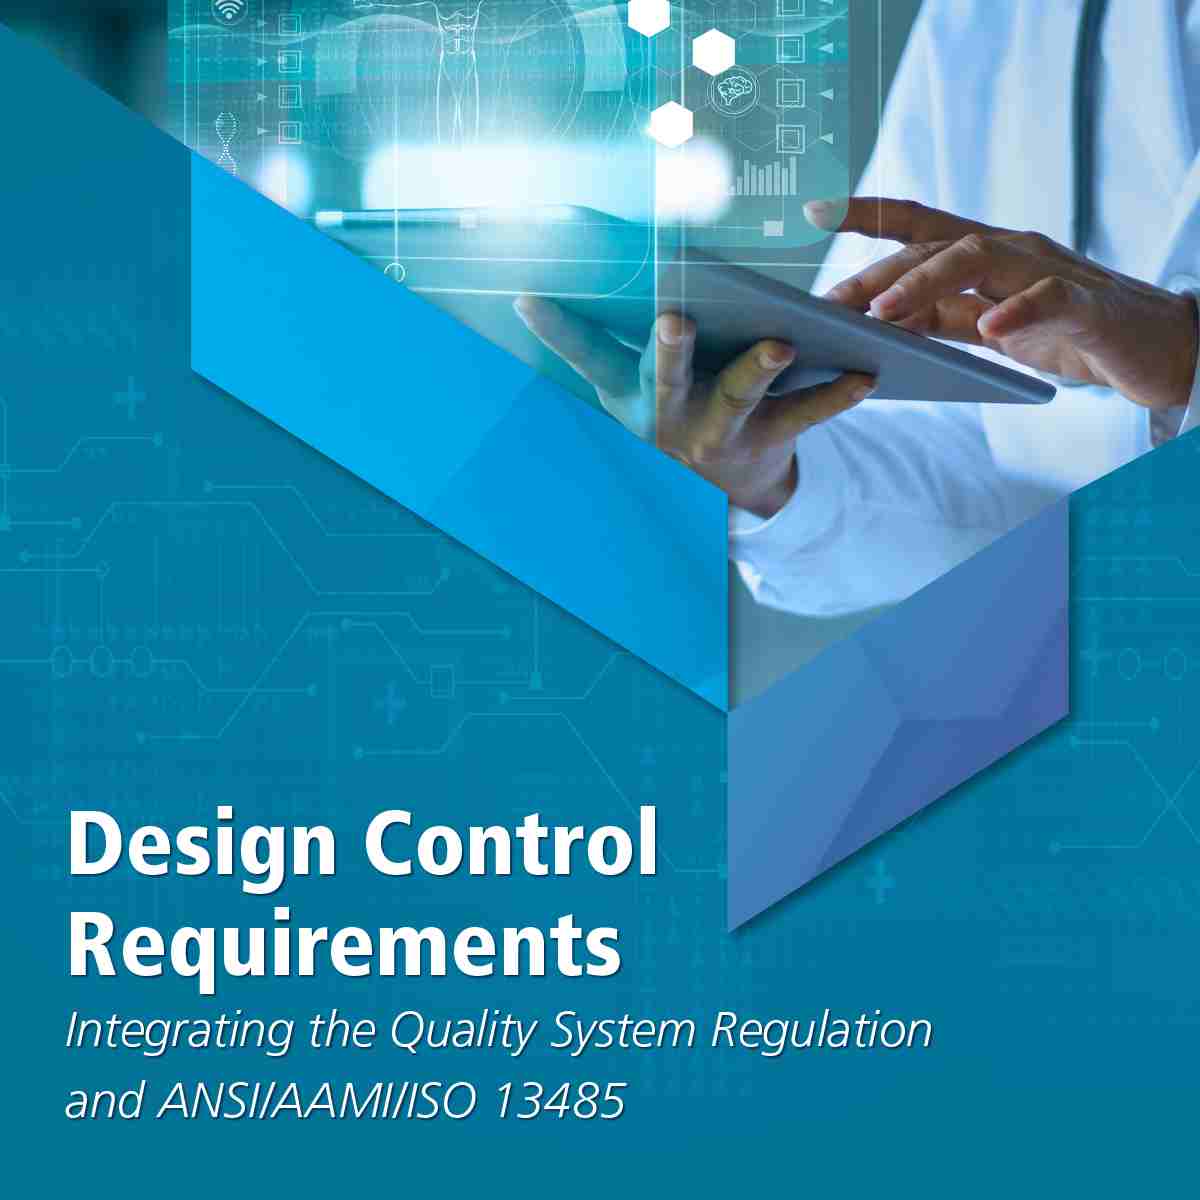 Design Control Requirements – Integrating the Quality System Regulation